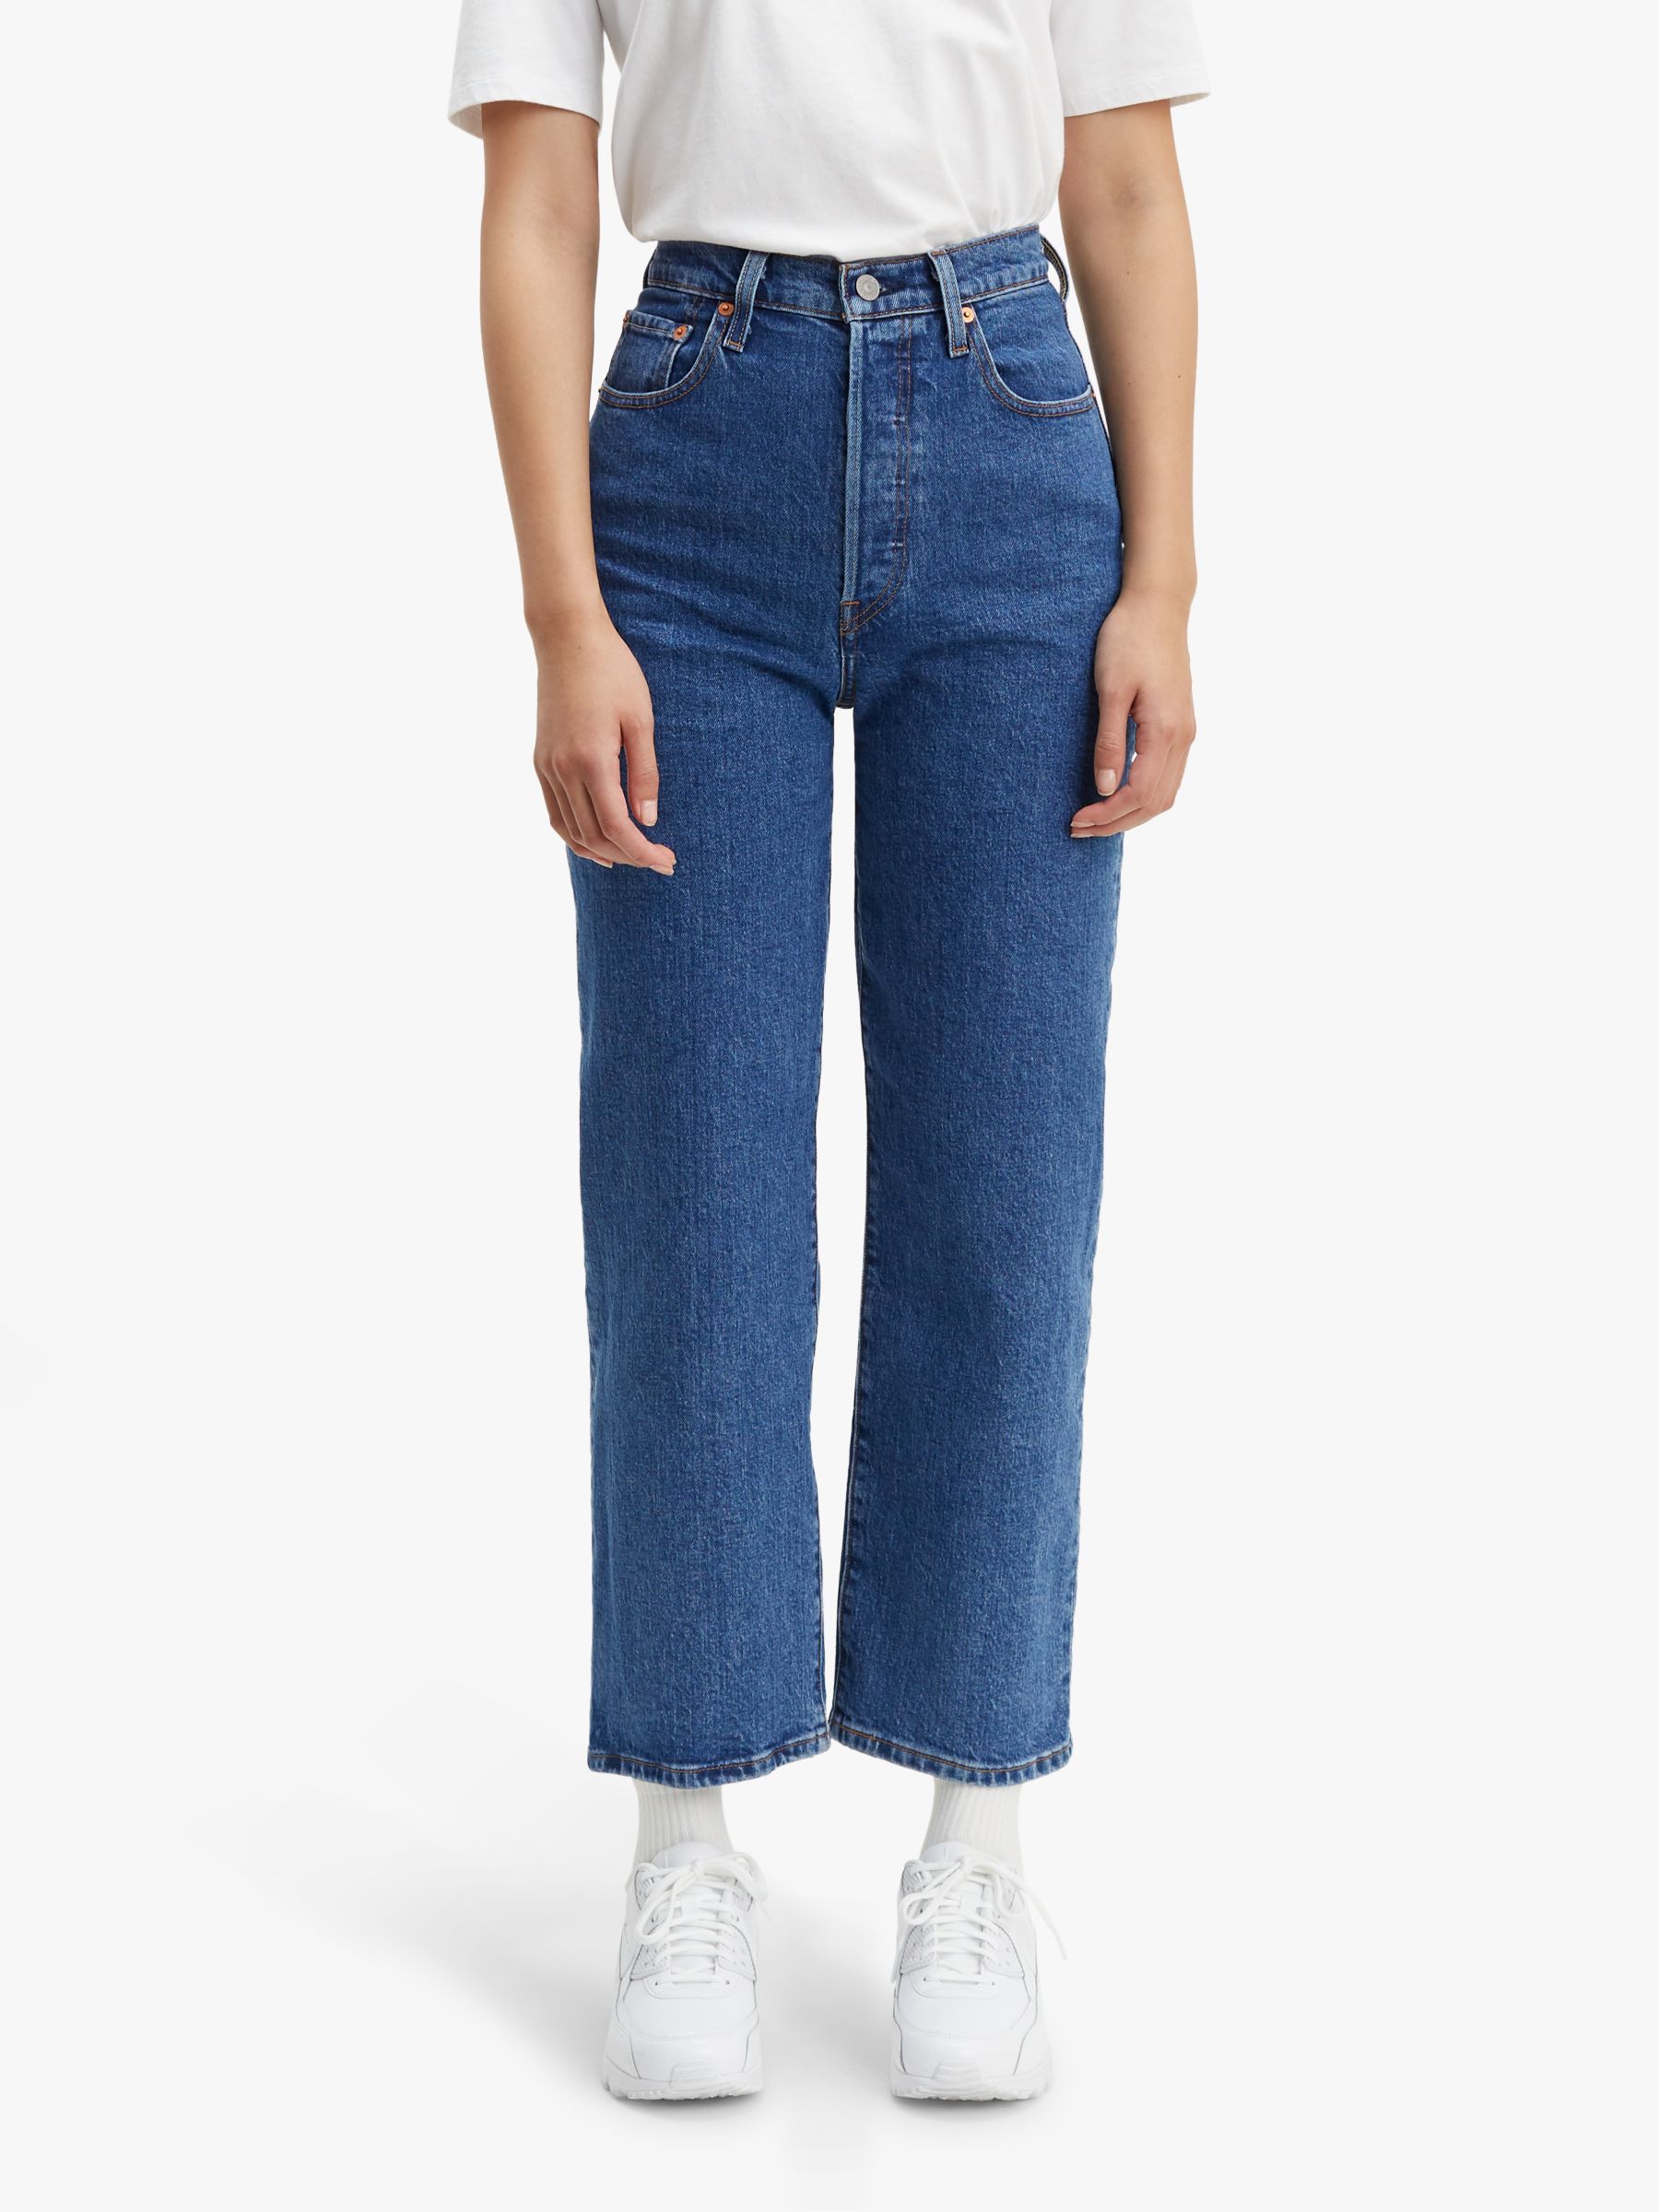 Ribcage Straight Ankle Jeans, Georgie 